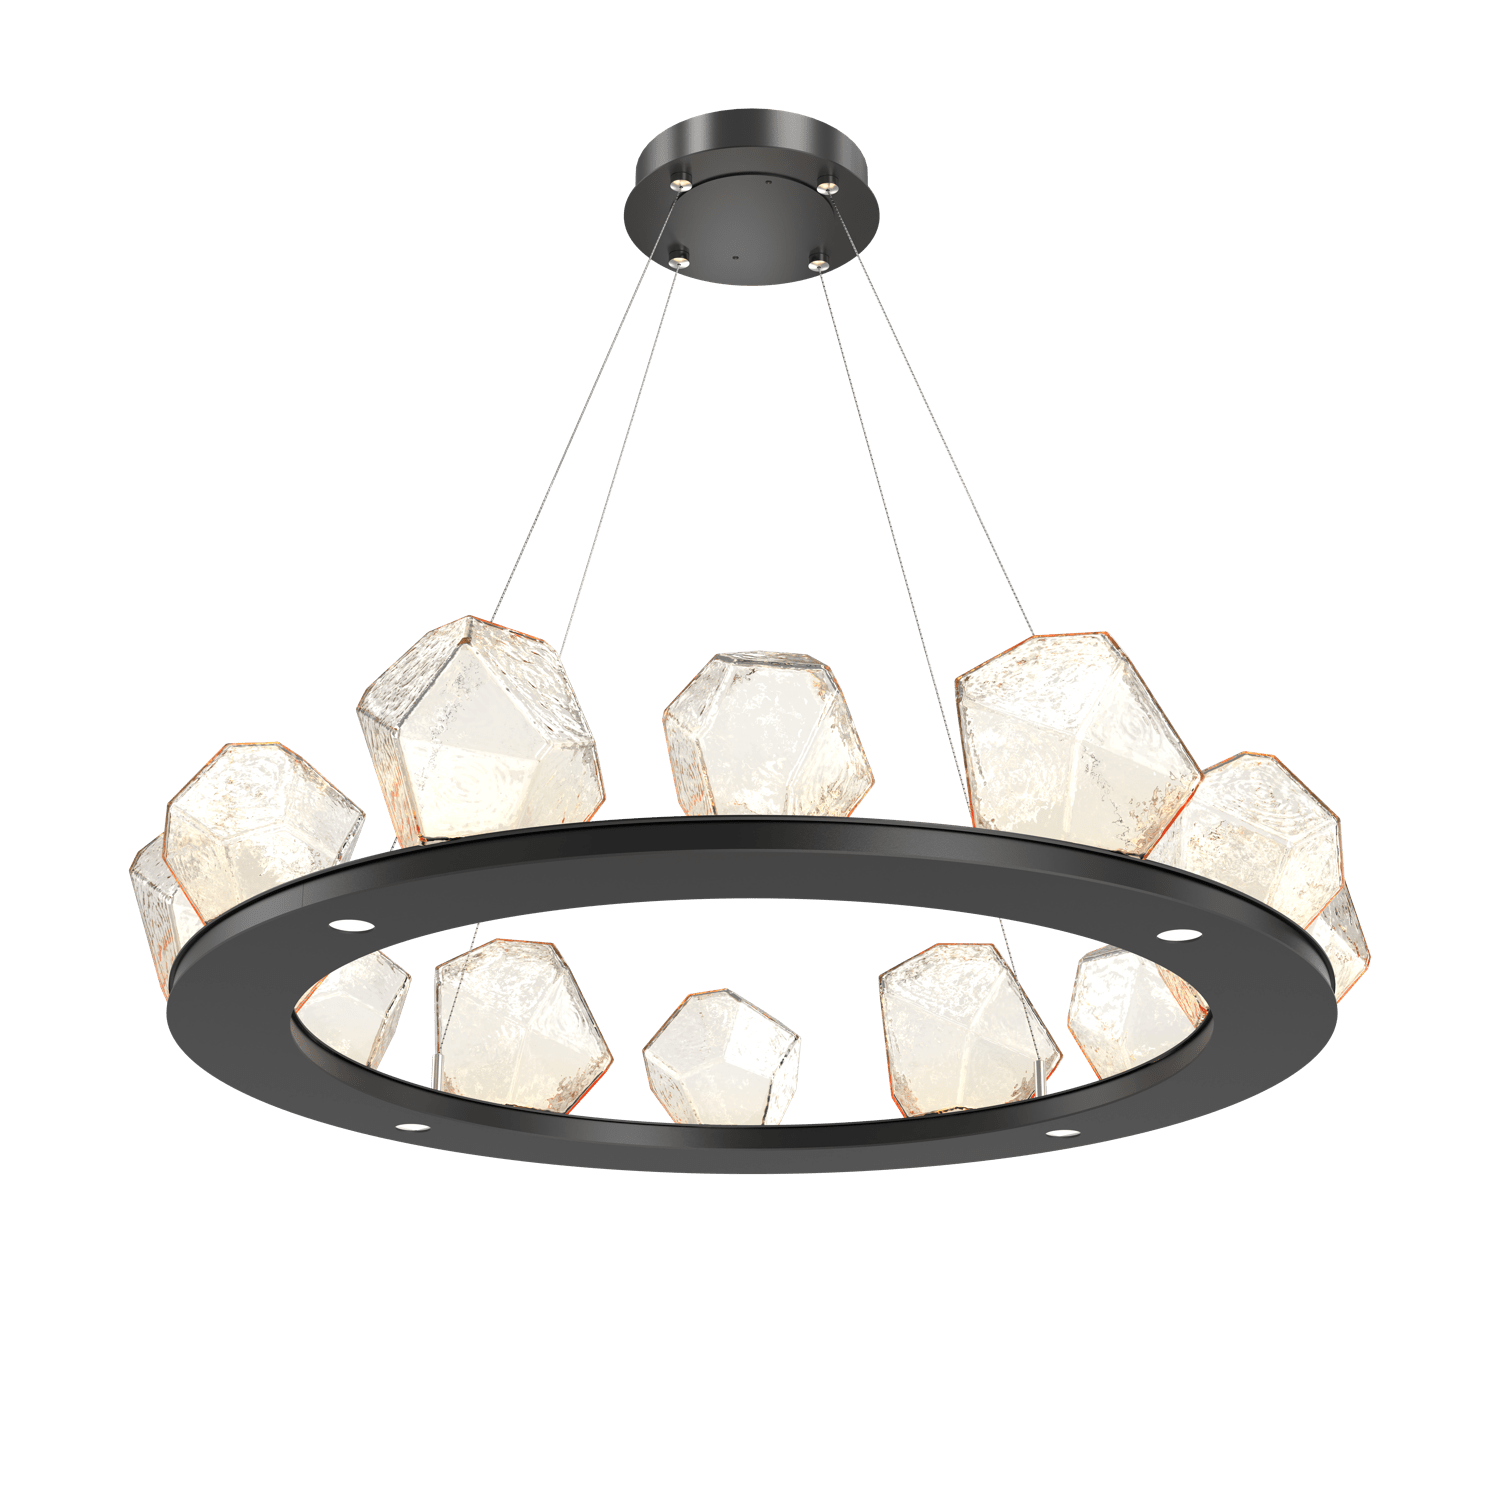 CHB0039-0C-MB-A-Hammerton-Studio-Gem-37-inch-ring-chandelier-with-matte-black-finish-and-amber-blown-glass-shades-and-LED-lamping